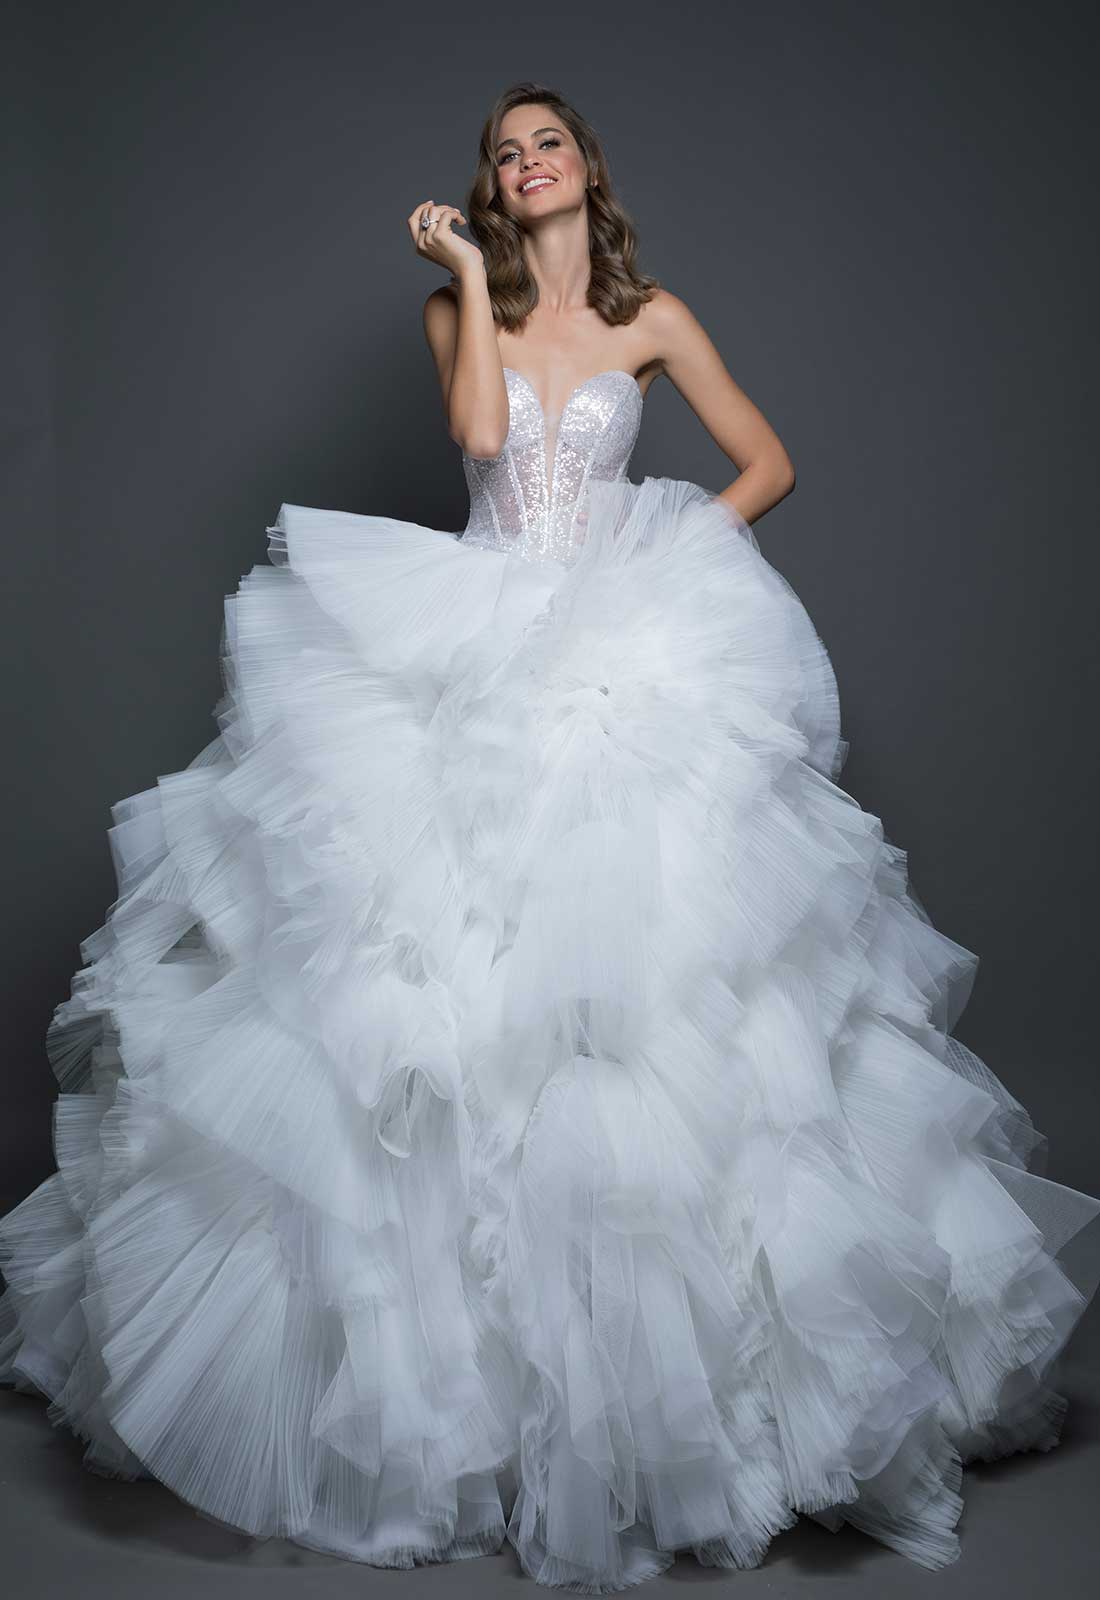 STYLE NO. 14604 CORSET AND 14602 SKIRT